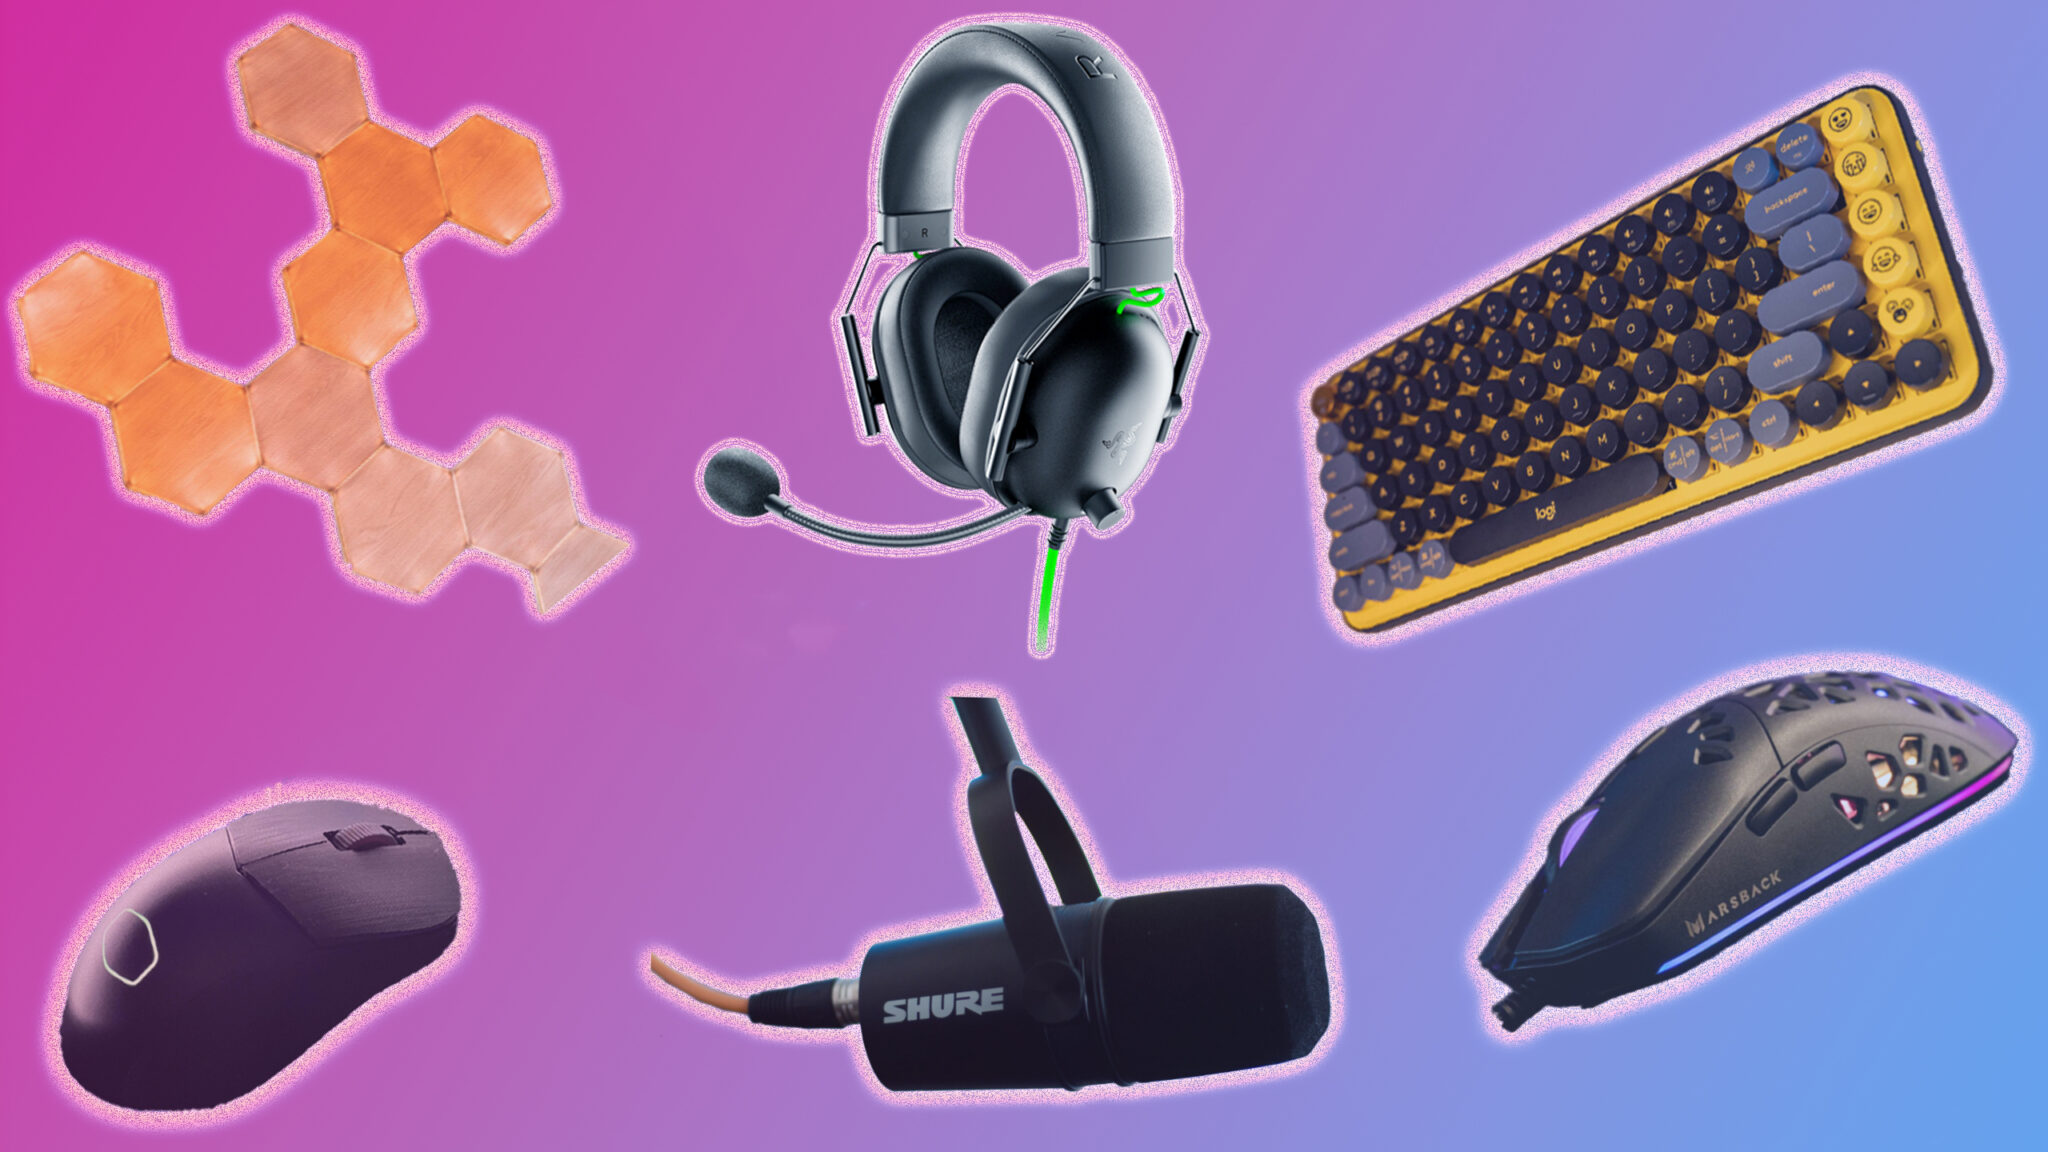 Here are some of 2021’s best PC accessories reviewed at MobileSyrup